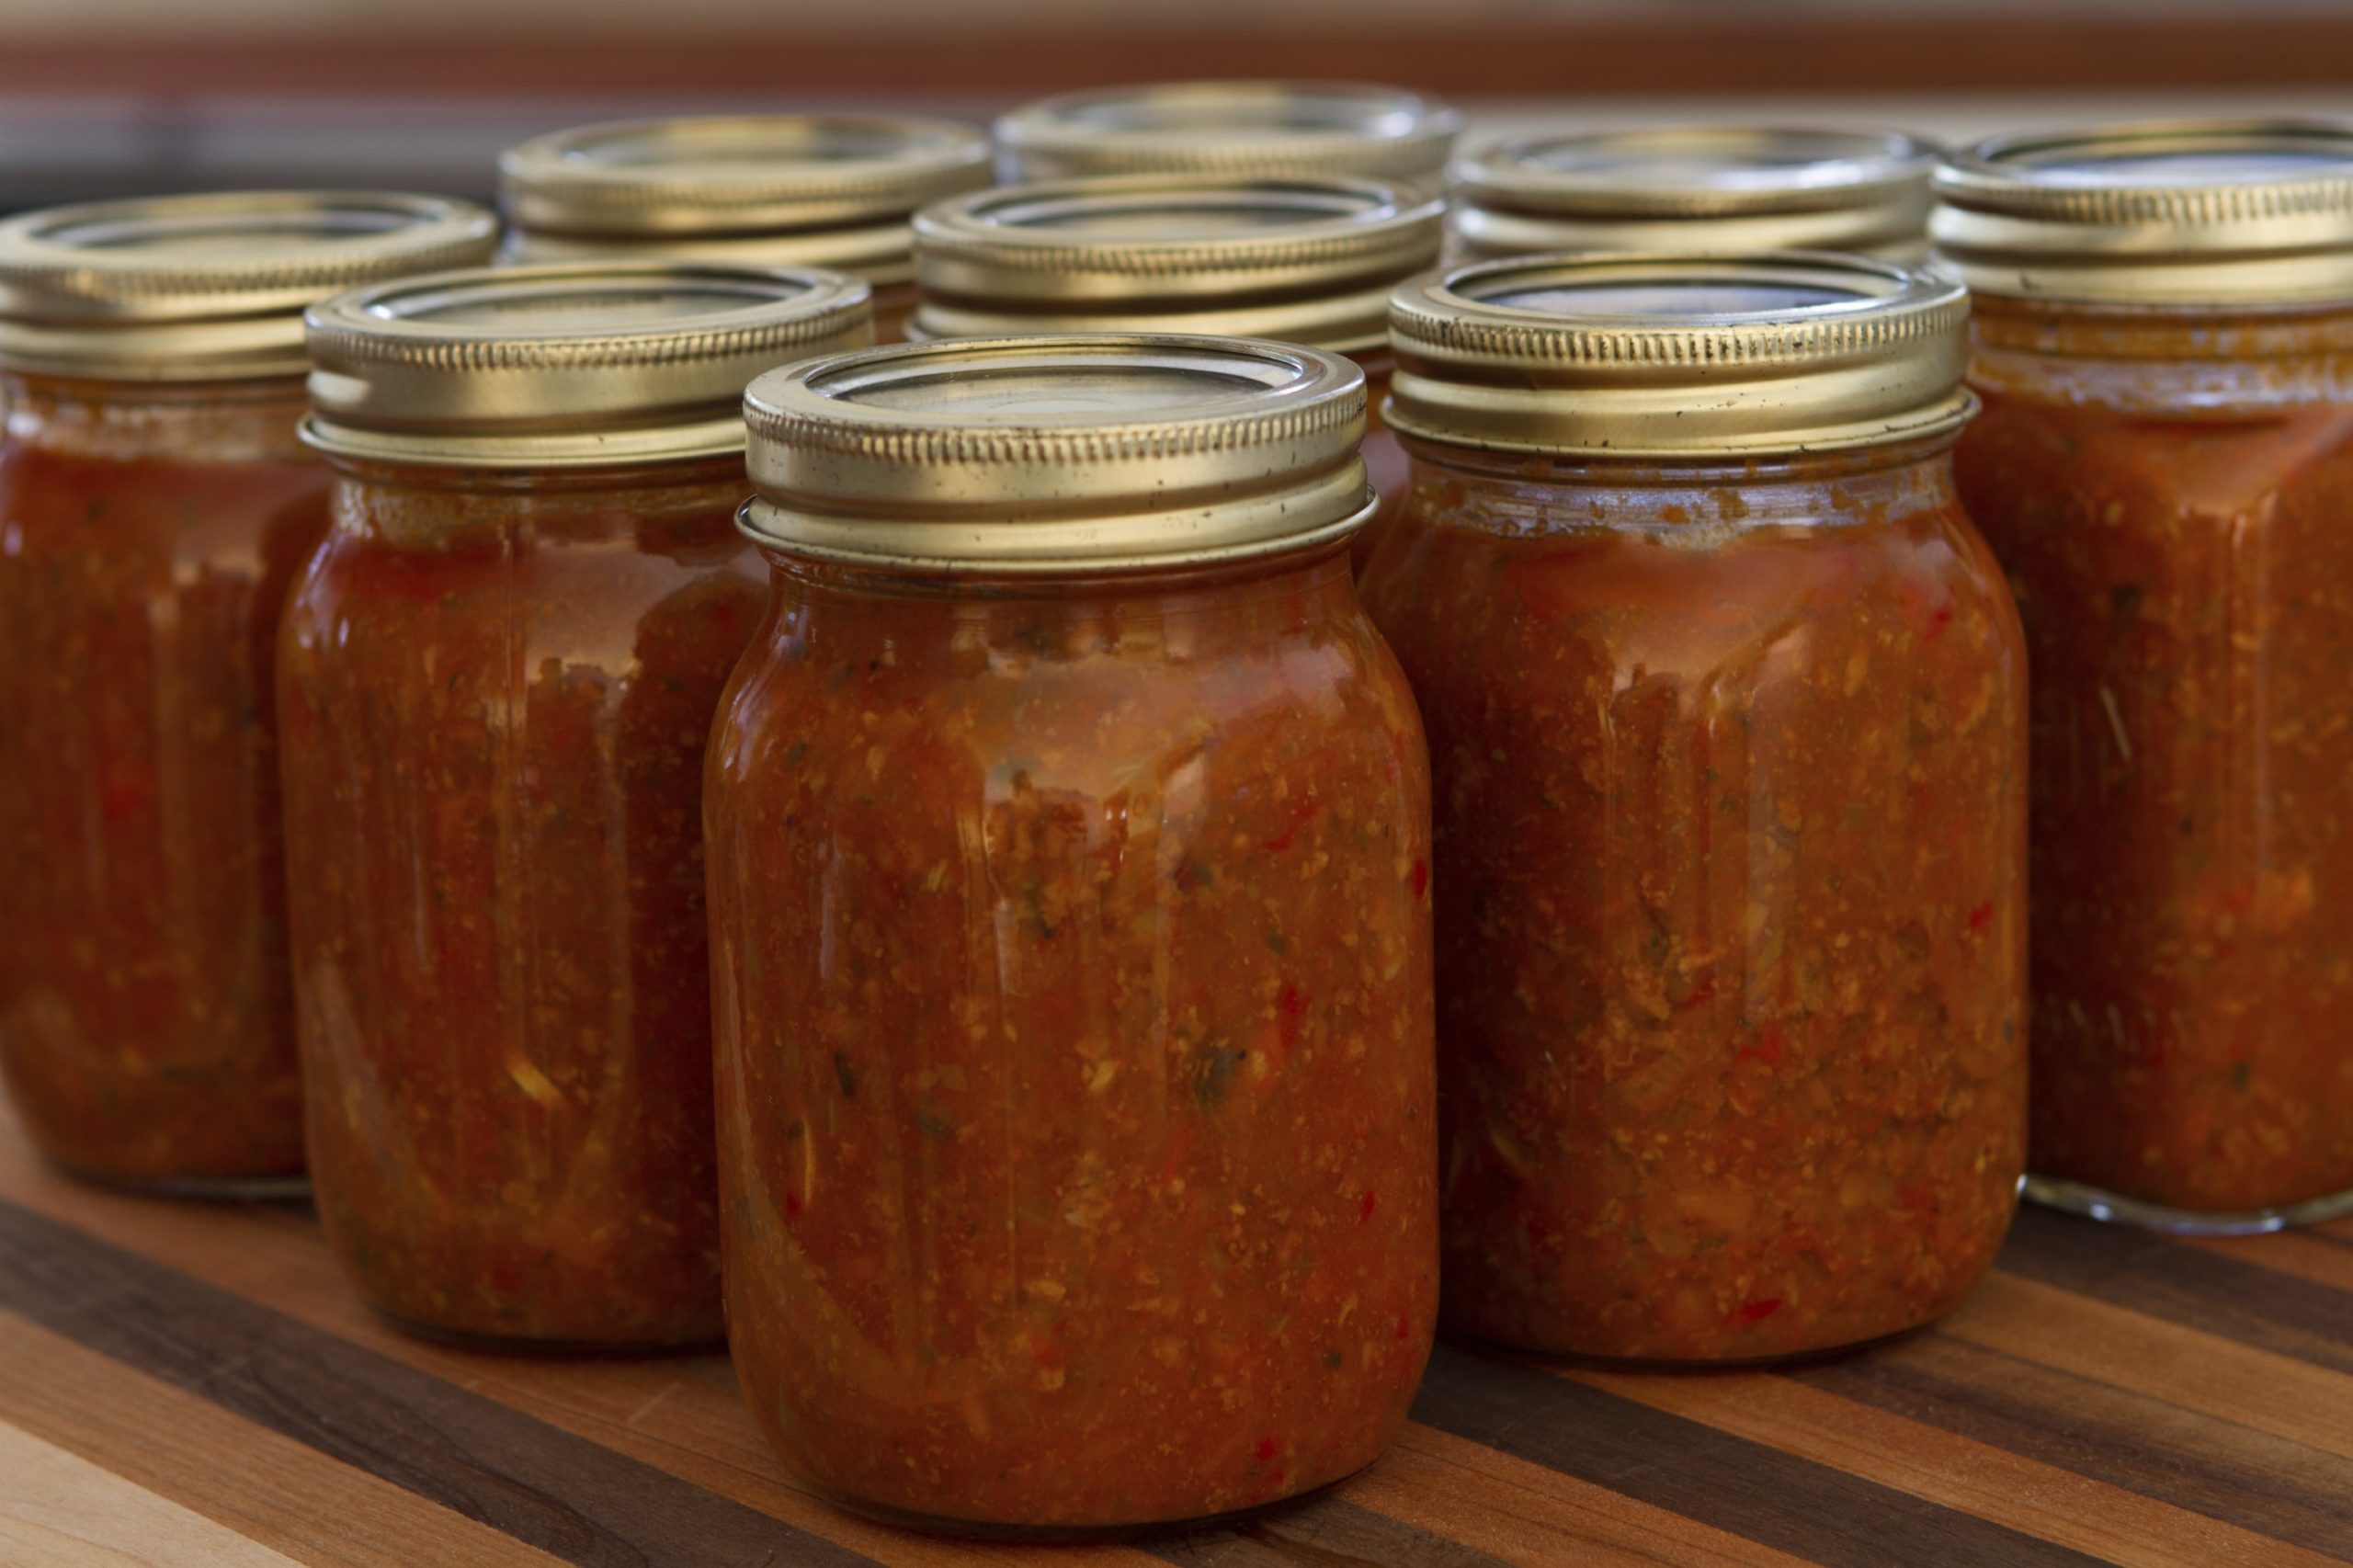 Do you heat pasta sauce from a jar? - Foodly